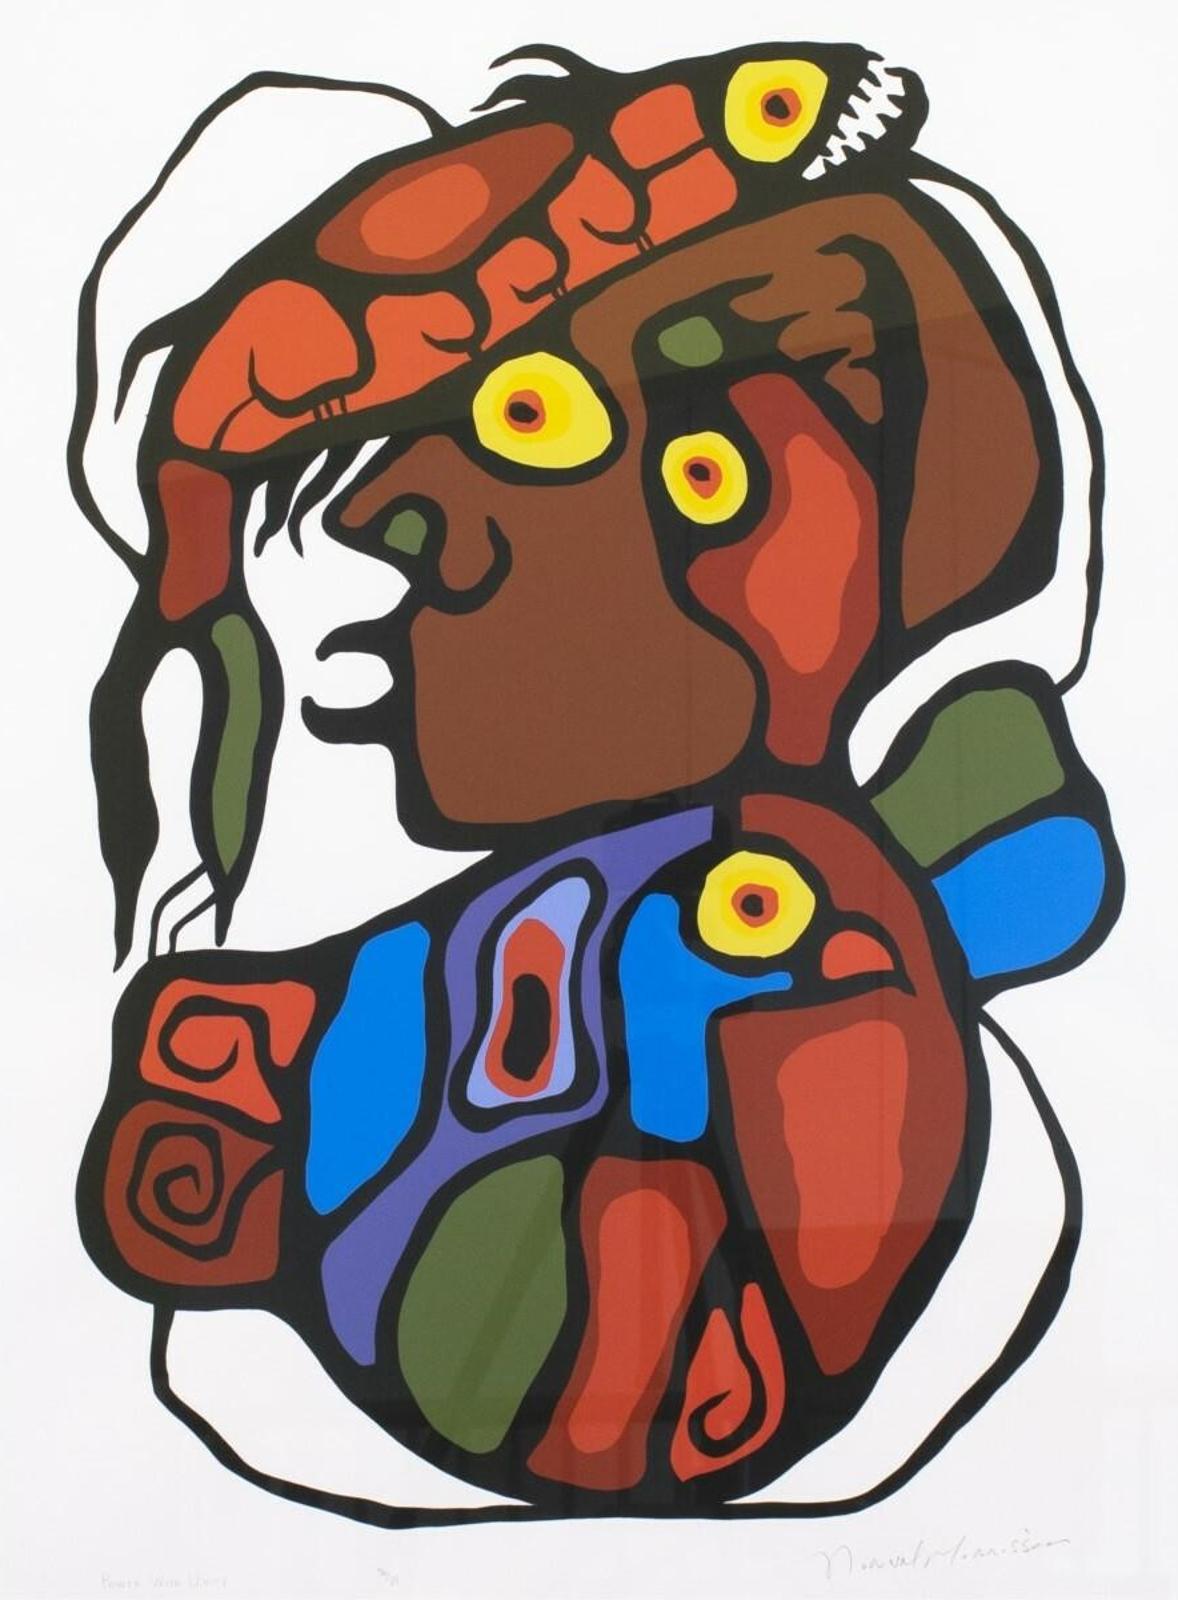 Norval H. Morrisseau (1931-2007) - Power With Unity